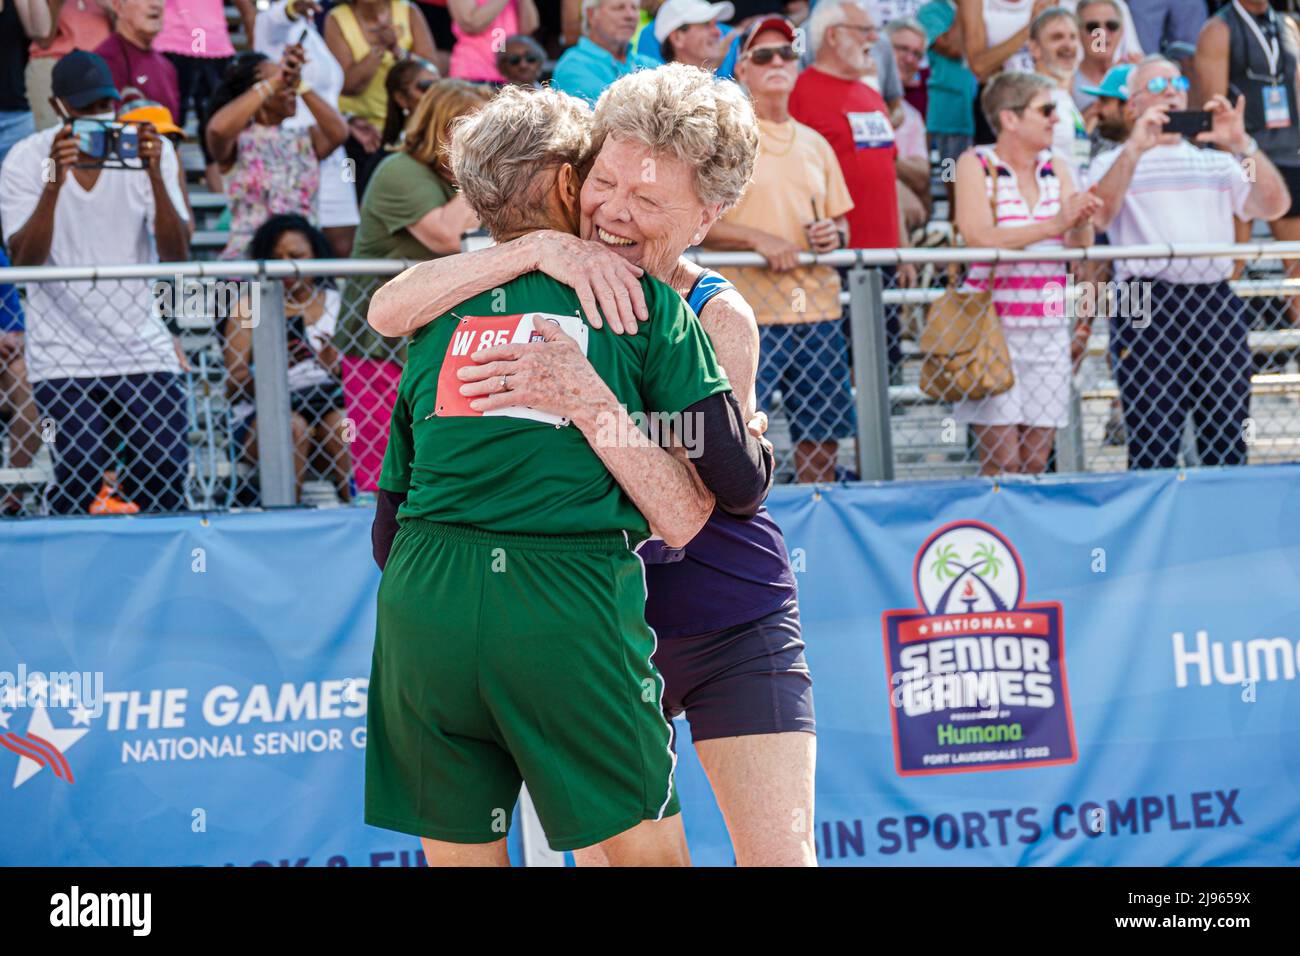 Fort Ft. Lauderdale Florida, Ansin Sports Complex Track & Field National Senior Games, mujeres mayores corredores competidores 100m 100 metros, raci raza Foto de stock